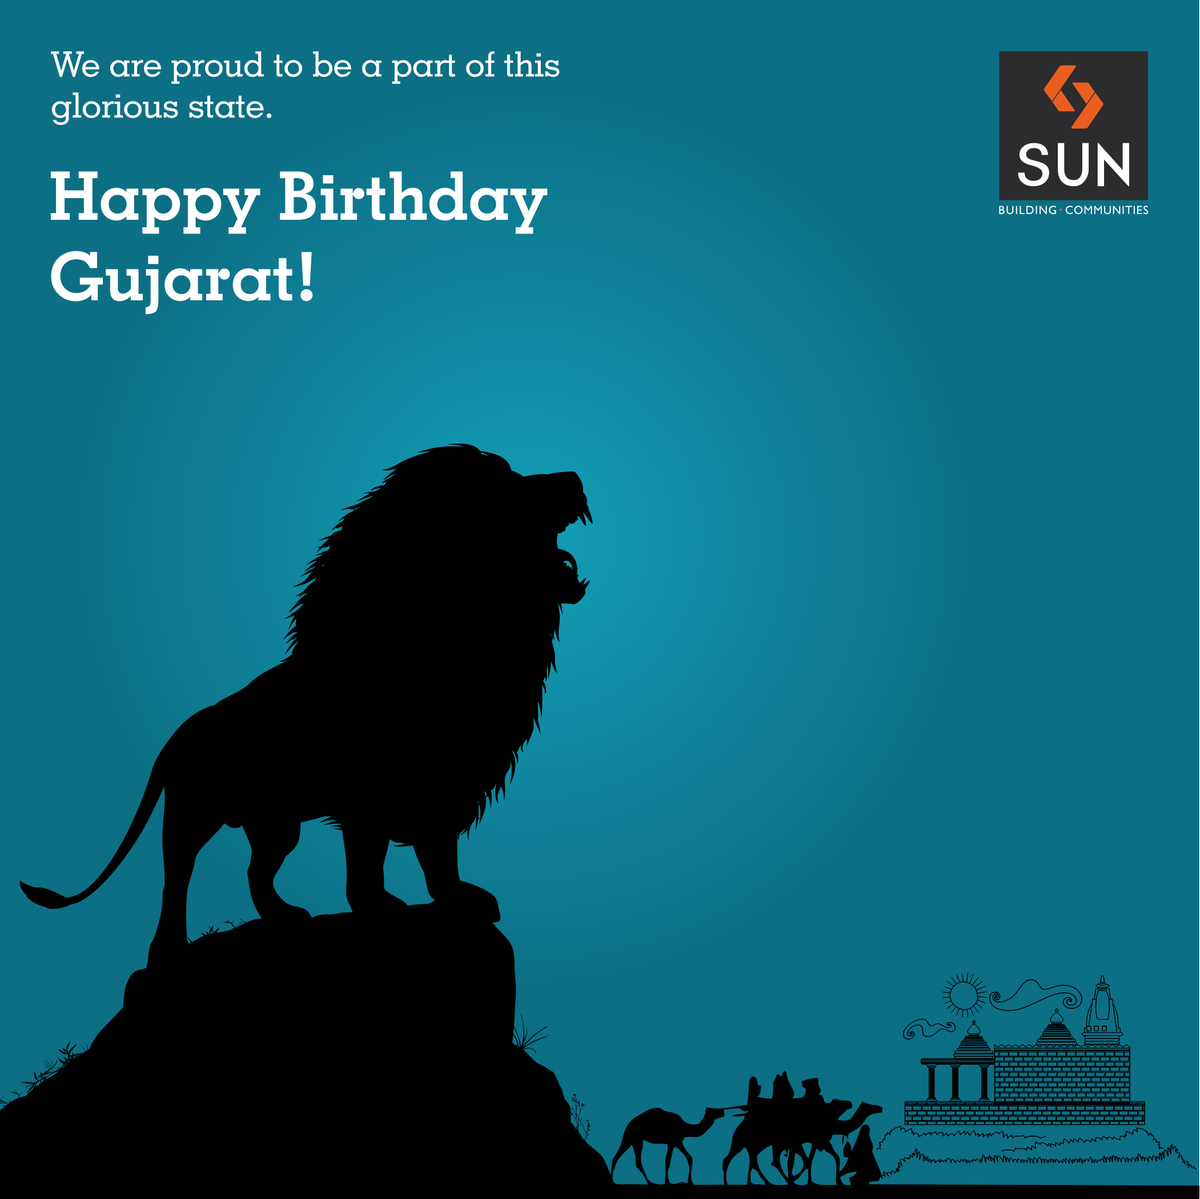 Let's together pay tribute to the state that comprises of vast traditions. #HappyBirthdayGujarat ! https://t.co/OFI7J1nMF4